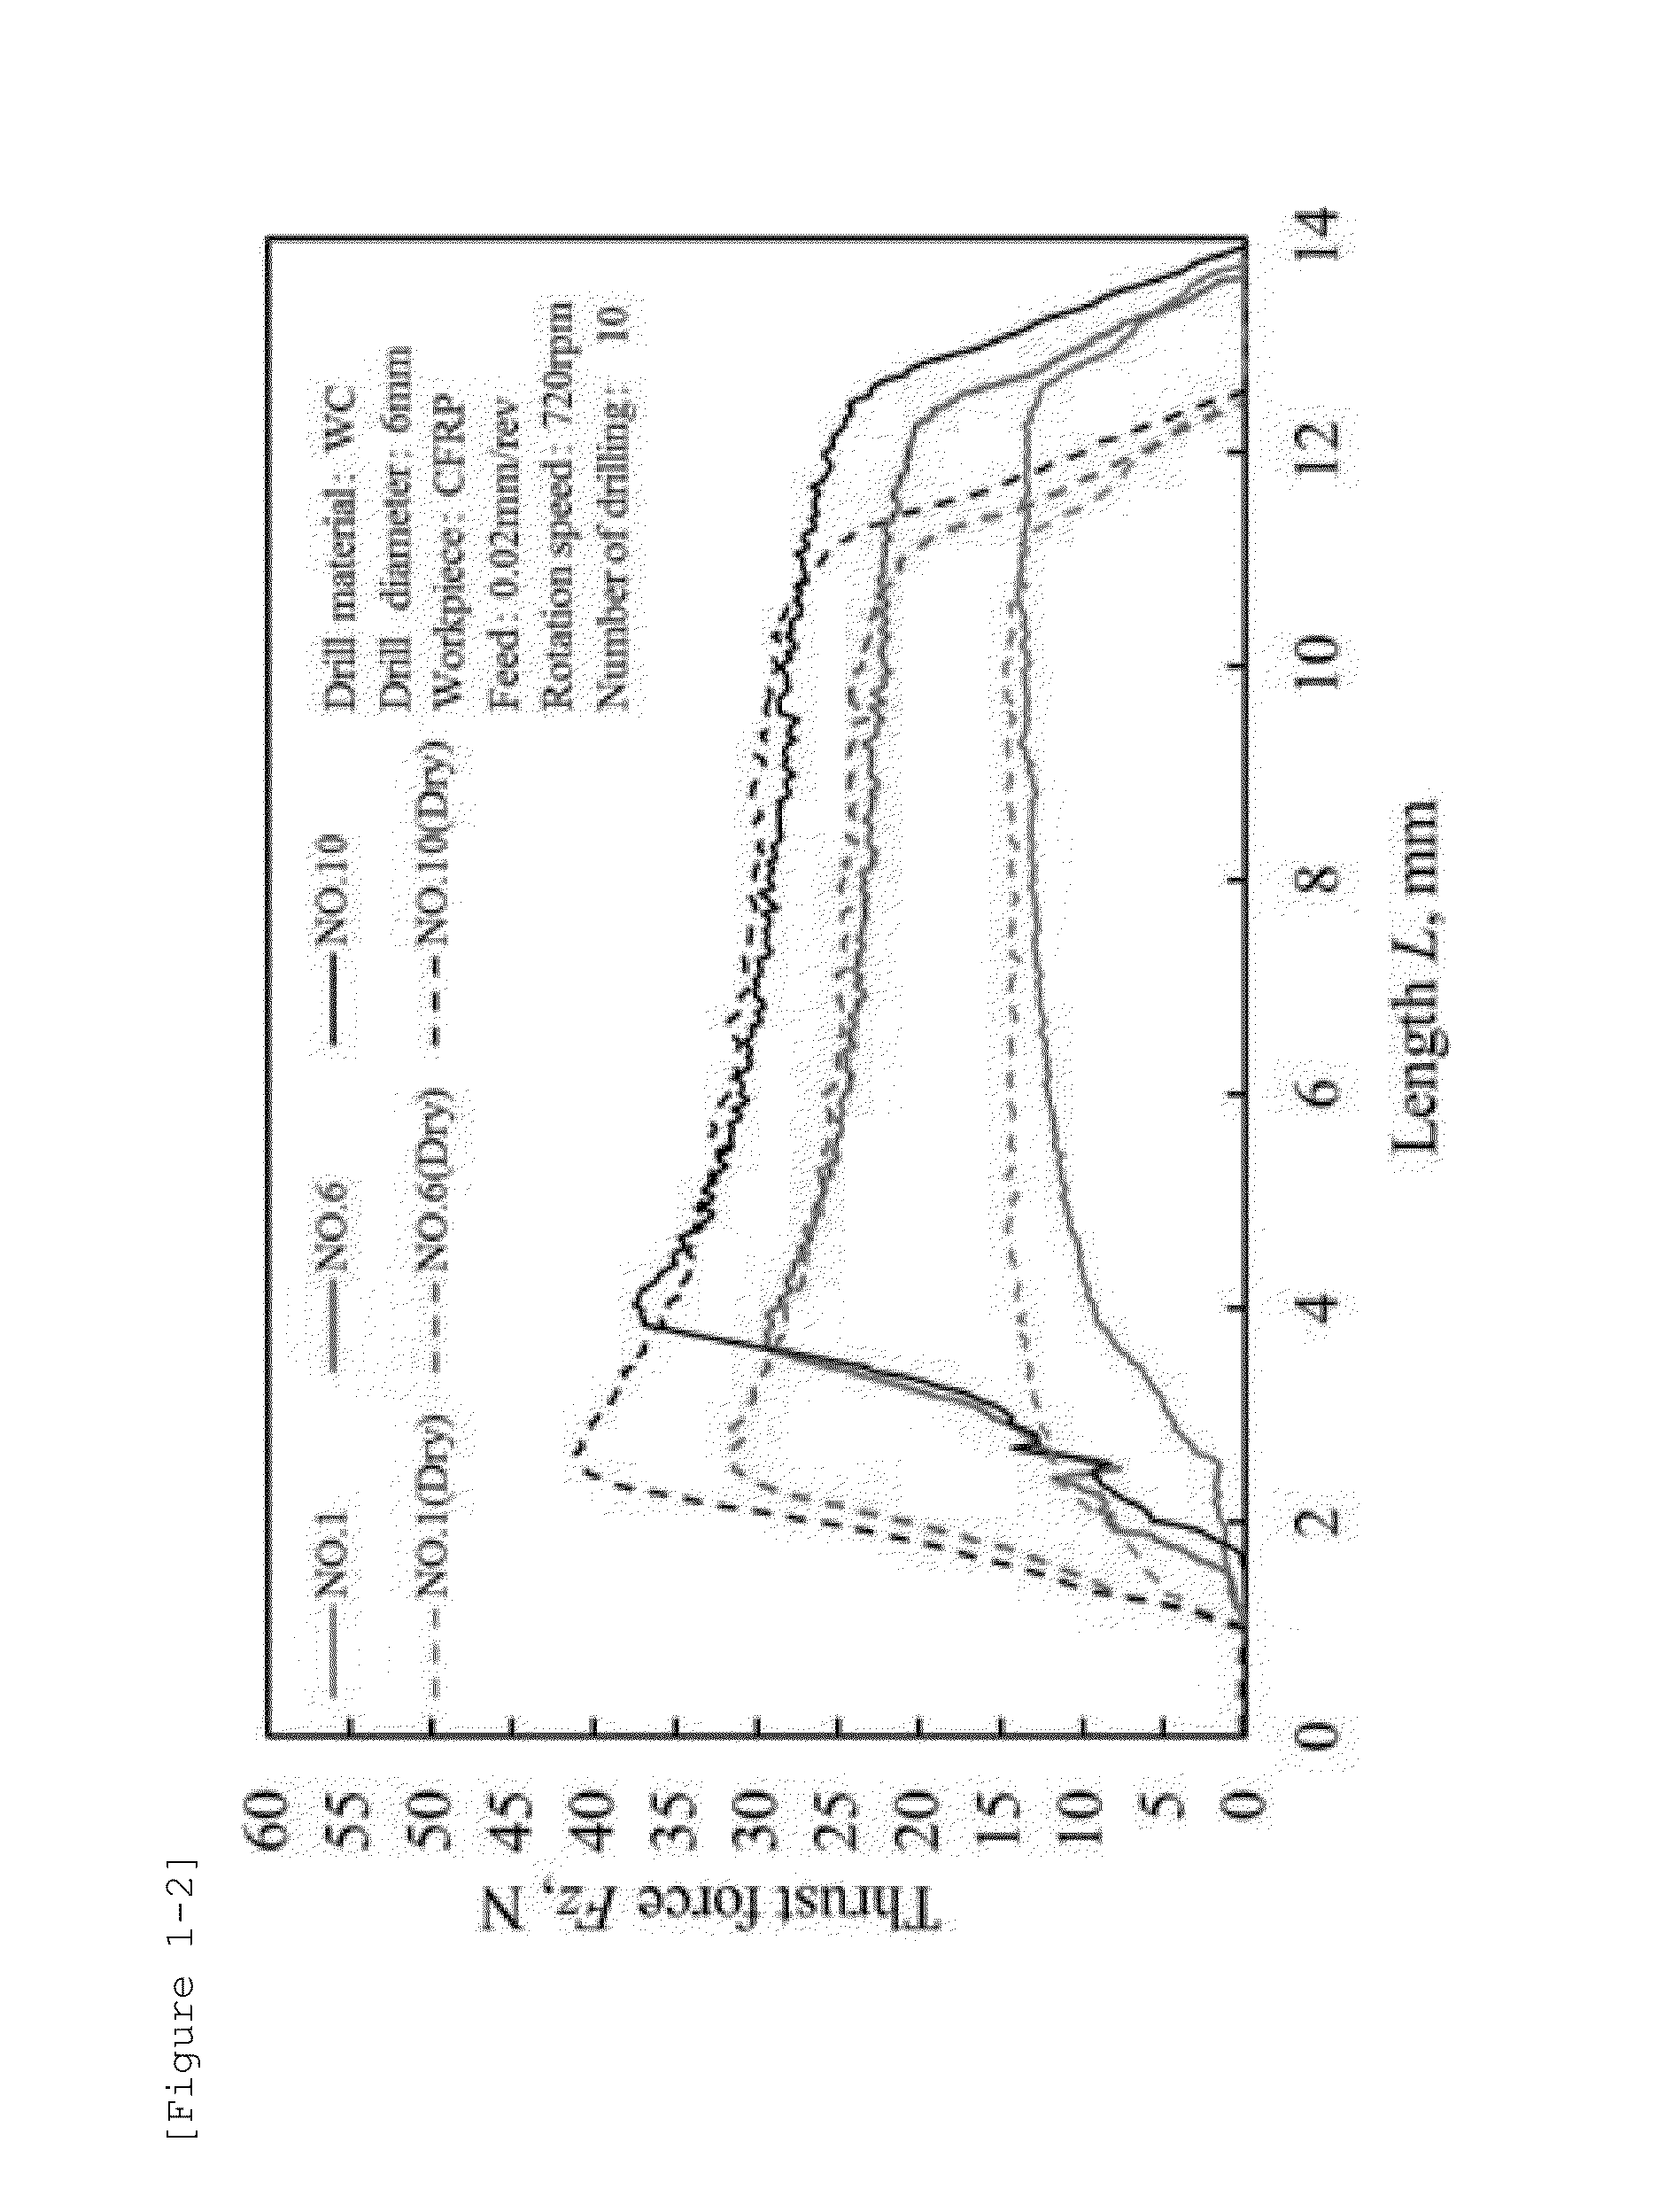 Entry sheet for cutting fiber reinforced composite material or metal, and cutting method for cutting fiber reinforced material or metal